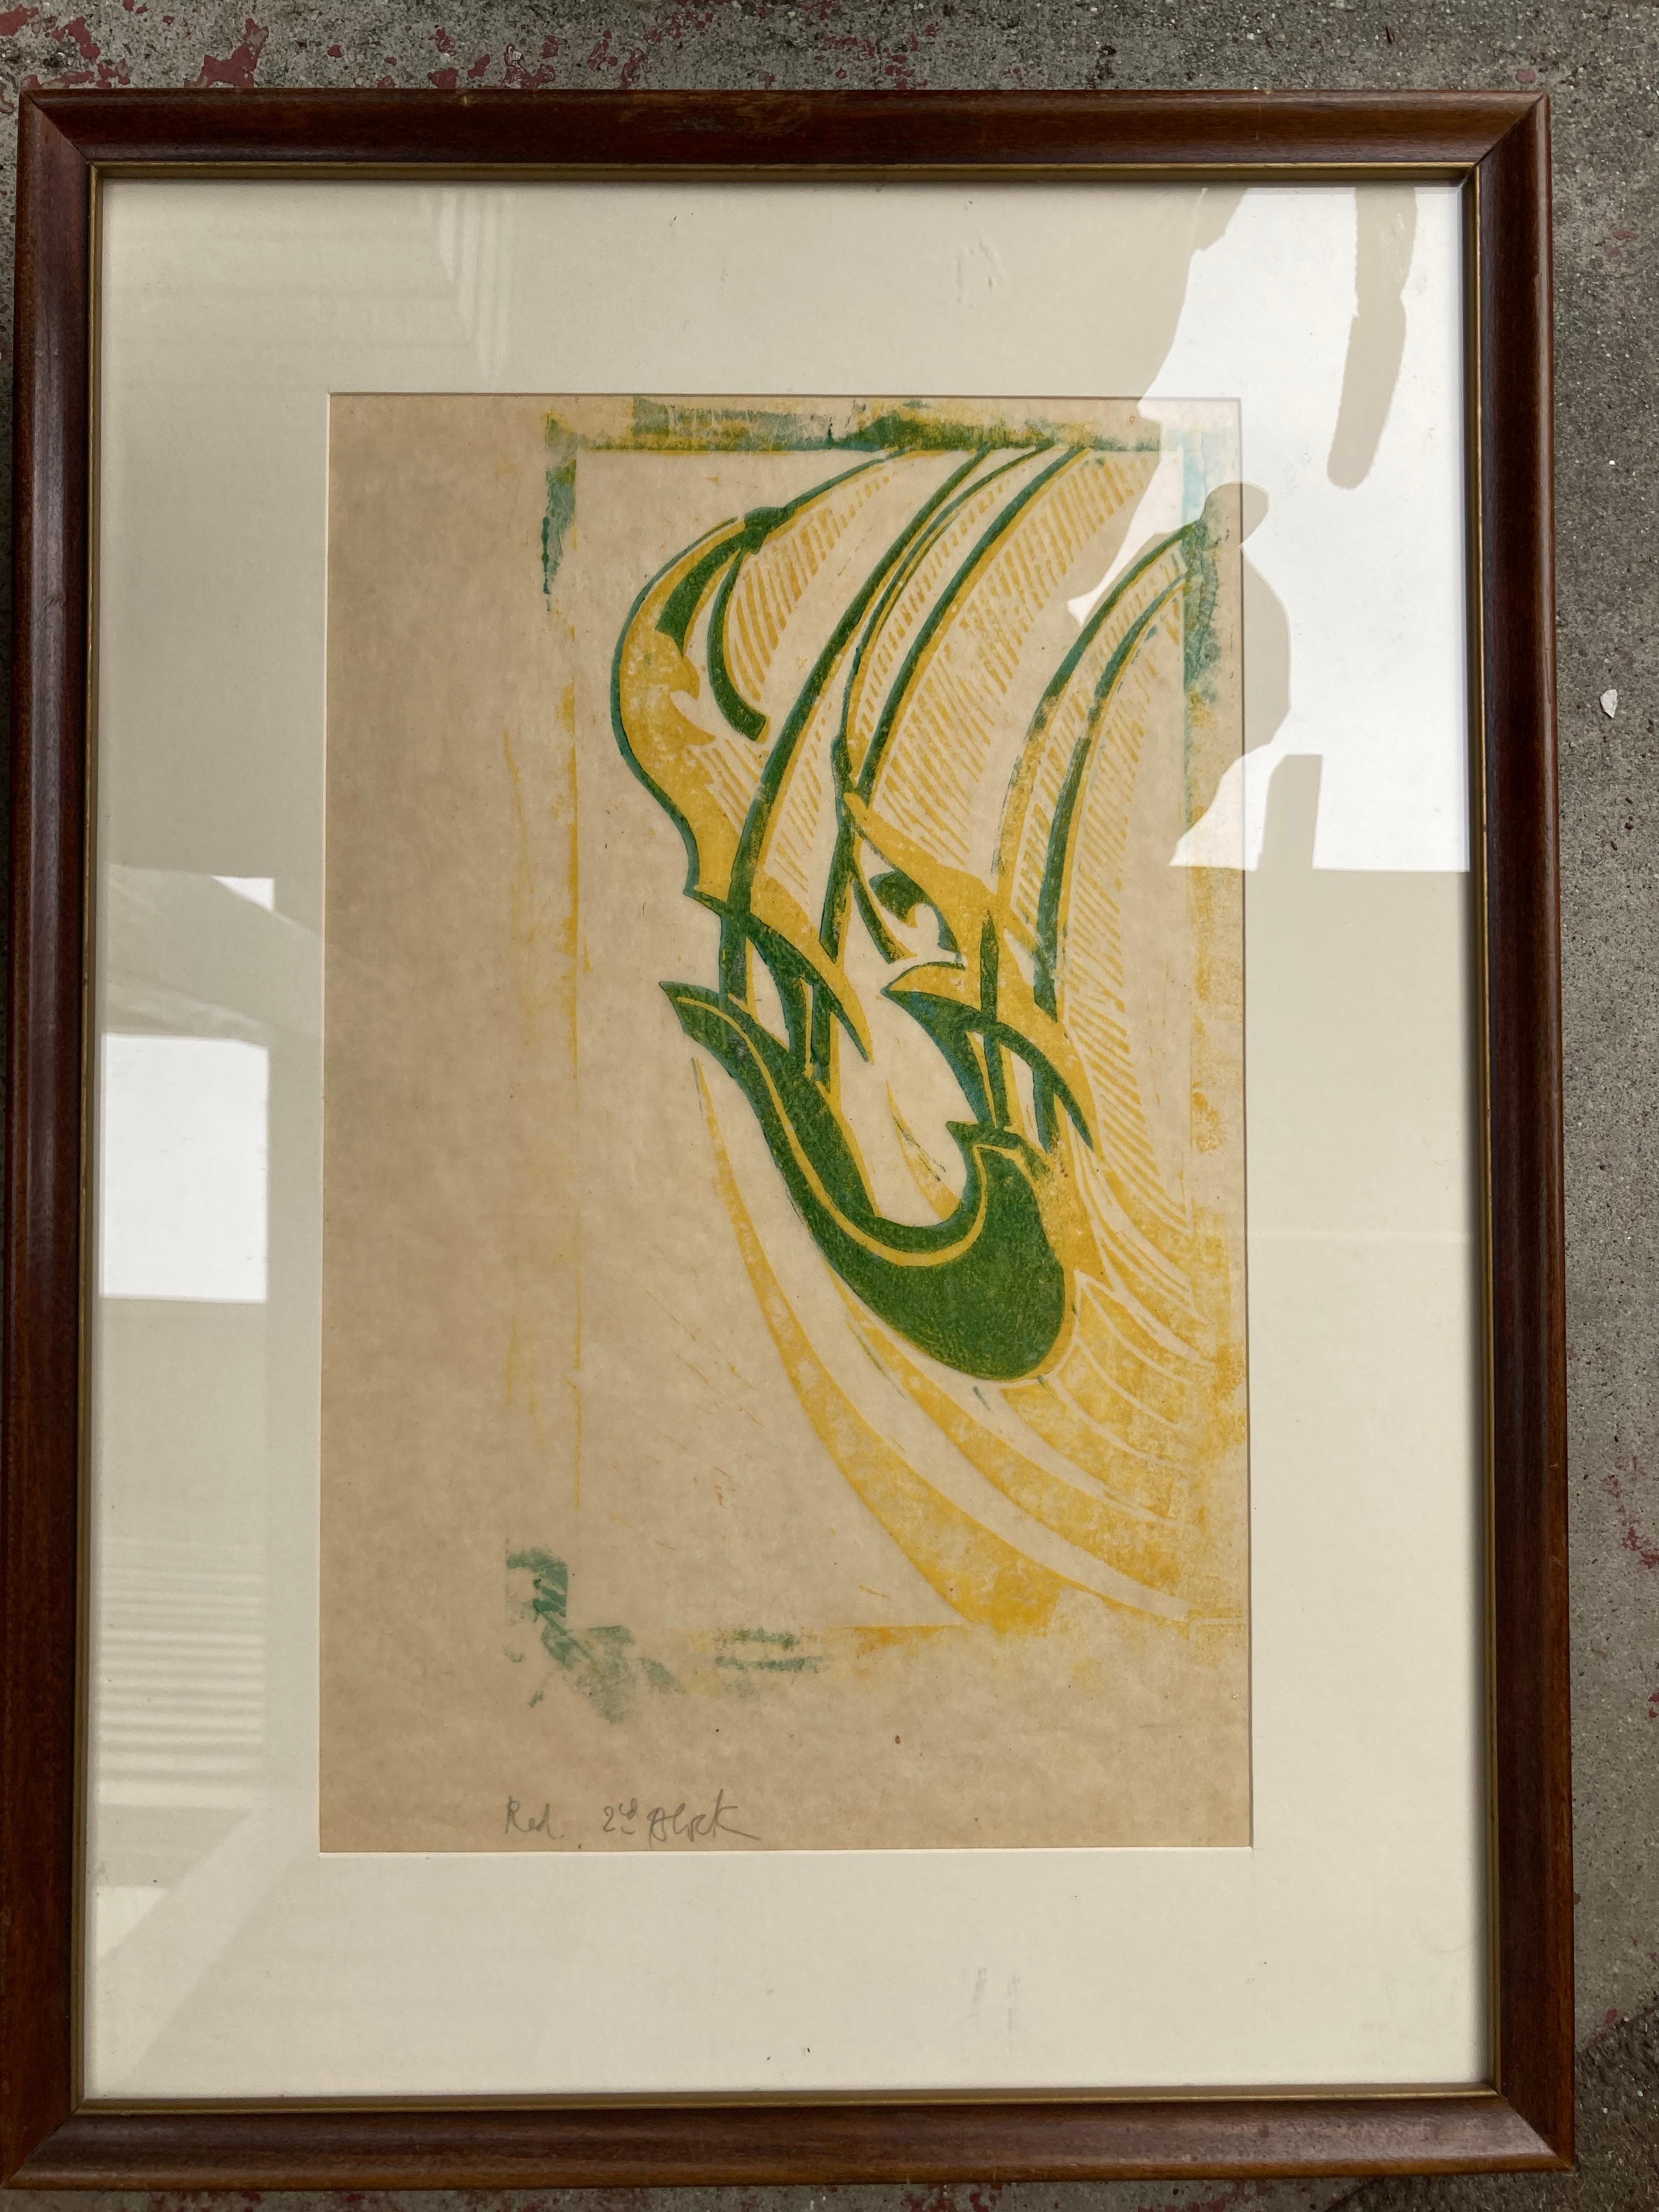 

CYRIL POWER (1872 -1951)

         THE HIGH SWING 1933 (CEP 37 ) 
         Linoleum cut unsigned trial proof. EXTREMELY RARE before edition of 60.  
         2 colors, green and yellow. Annotated by Power: “Red 2nd Block”.  On     
        